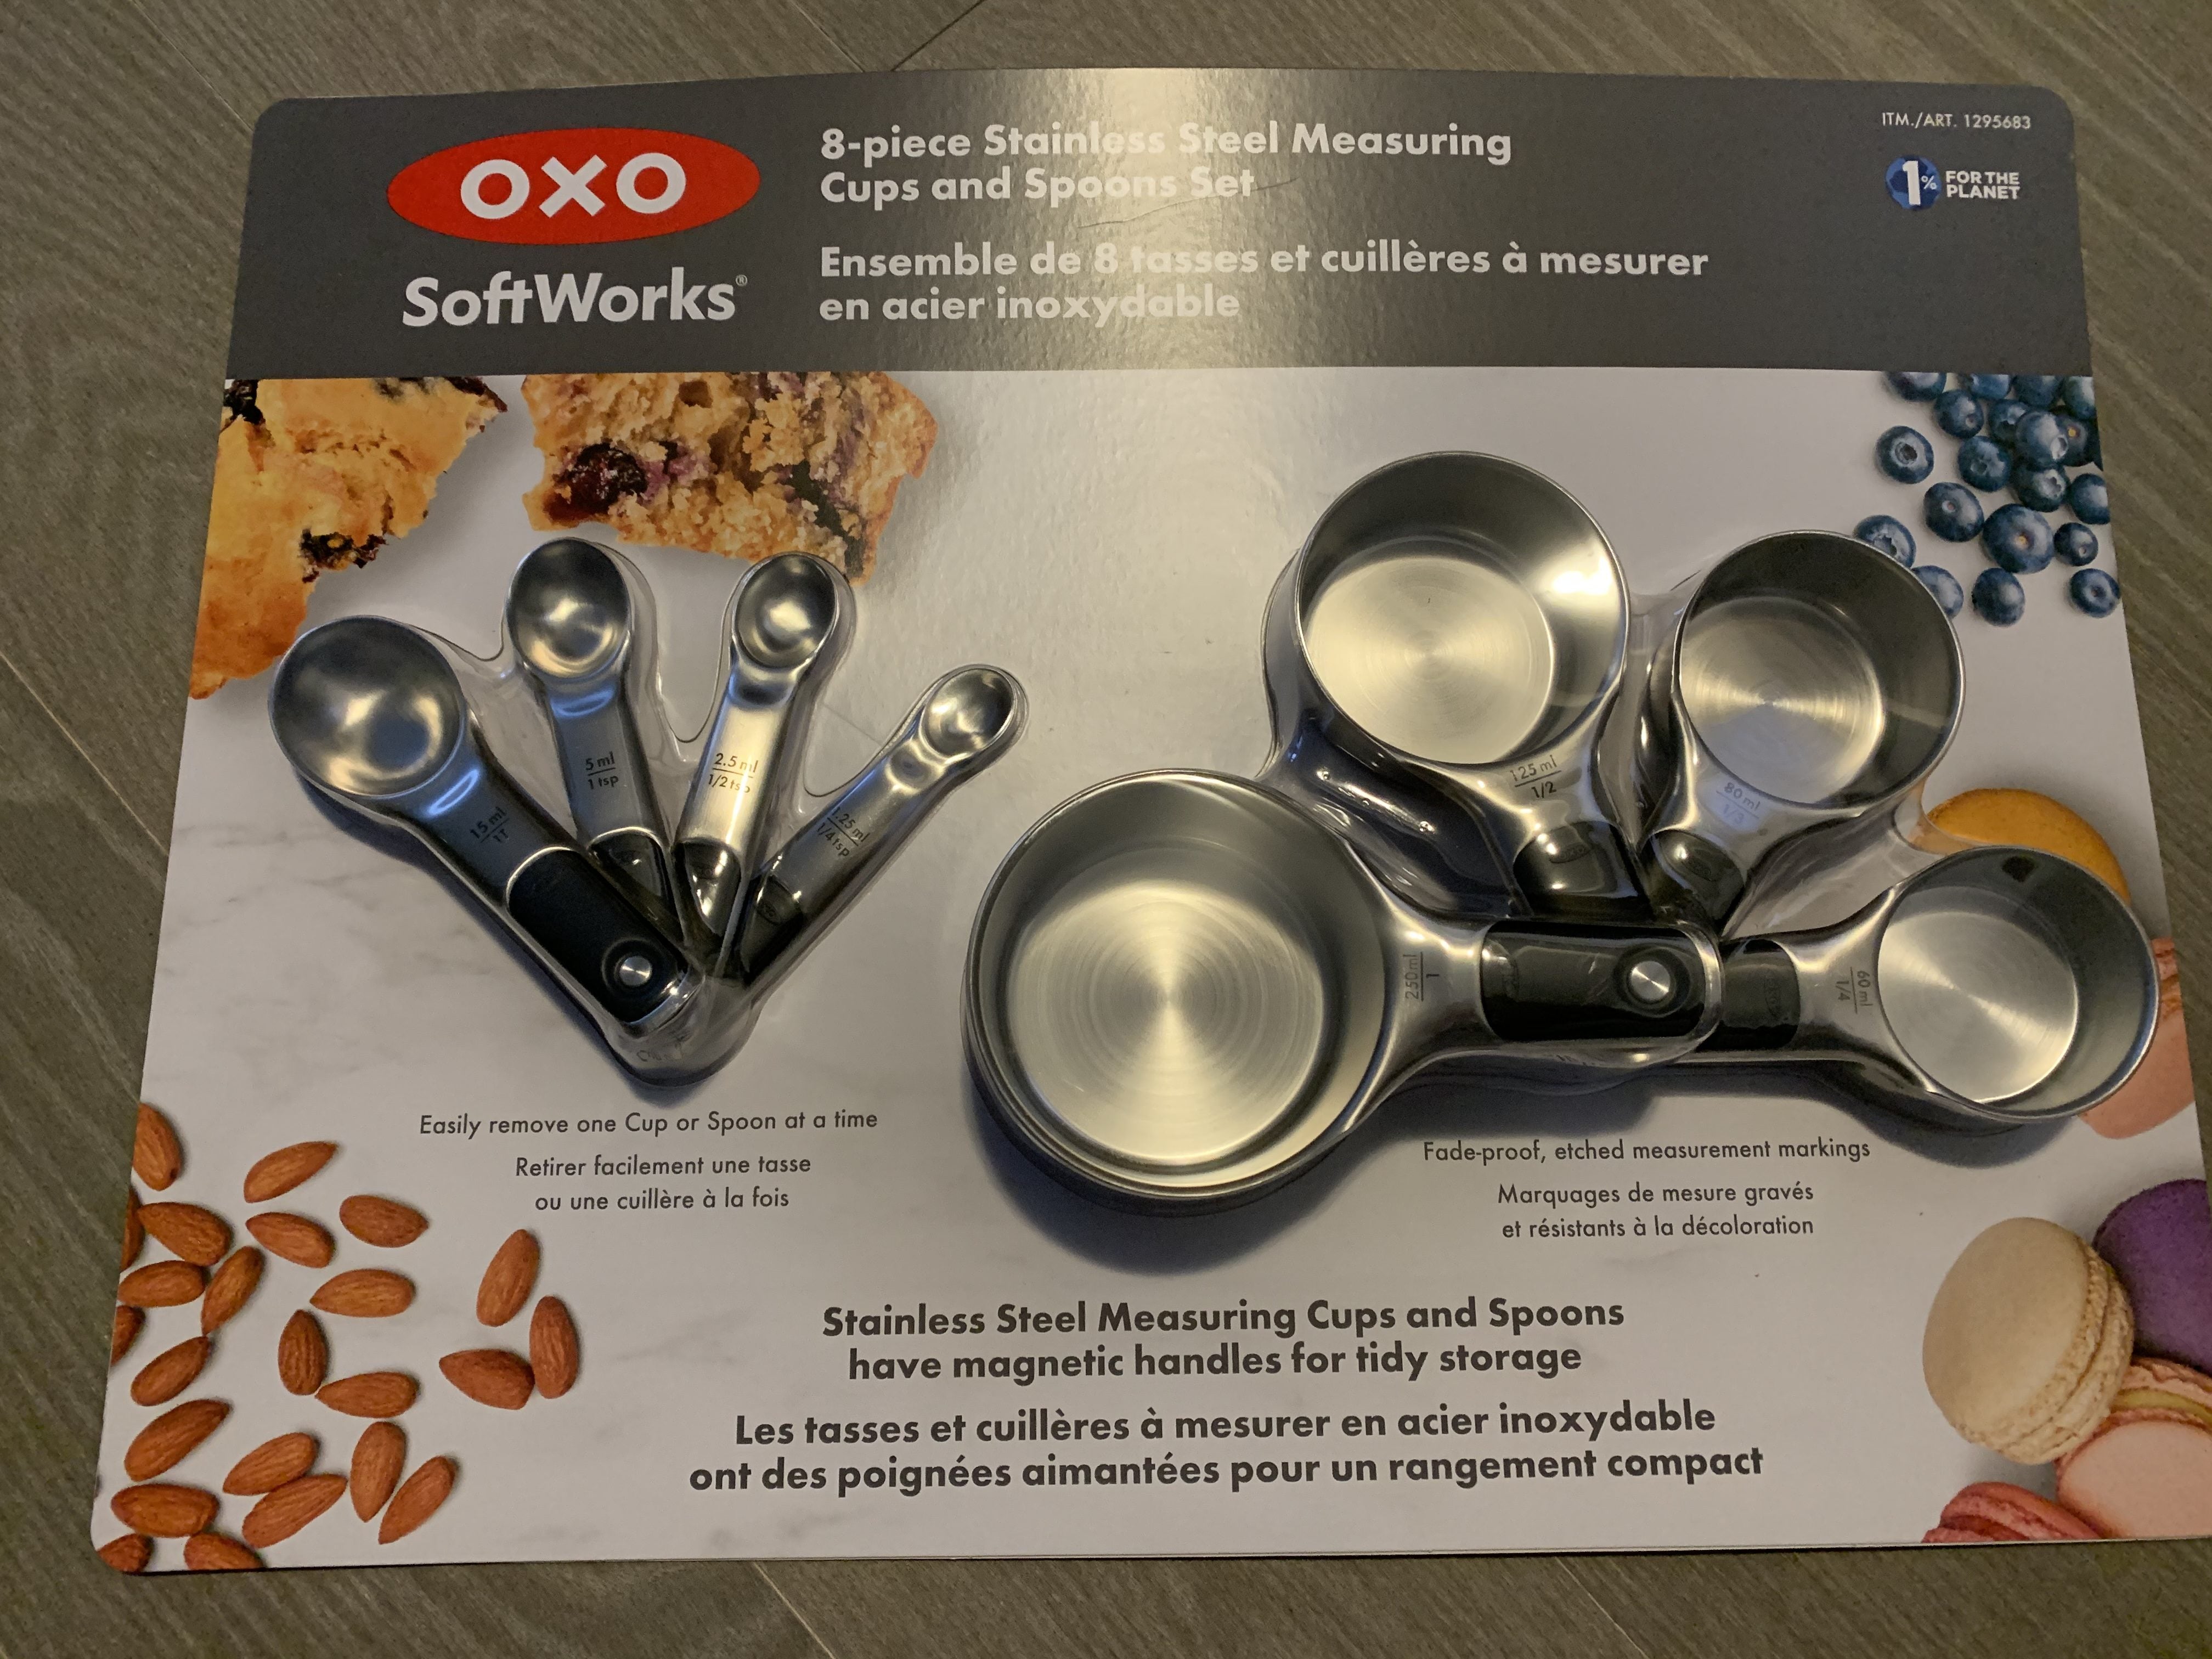 Costco] OXO Magnetic Measuring Cups and Spoons $28.99 - Page 2 -  RedFlagDeals.com Forums